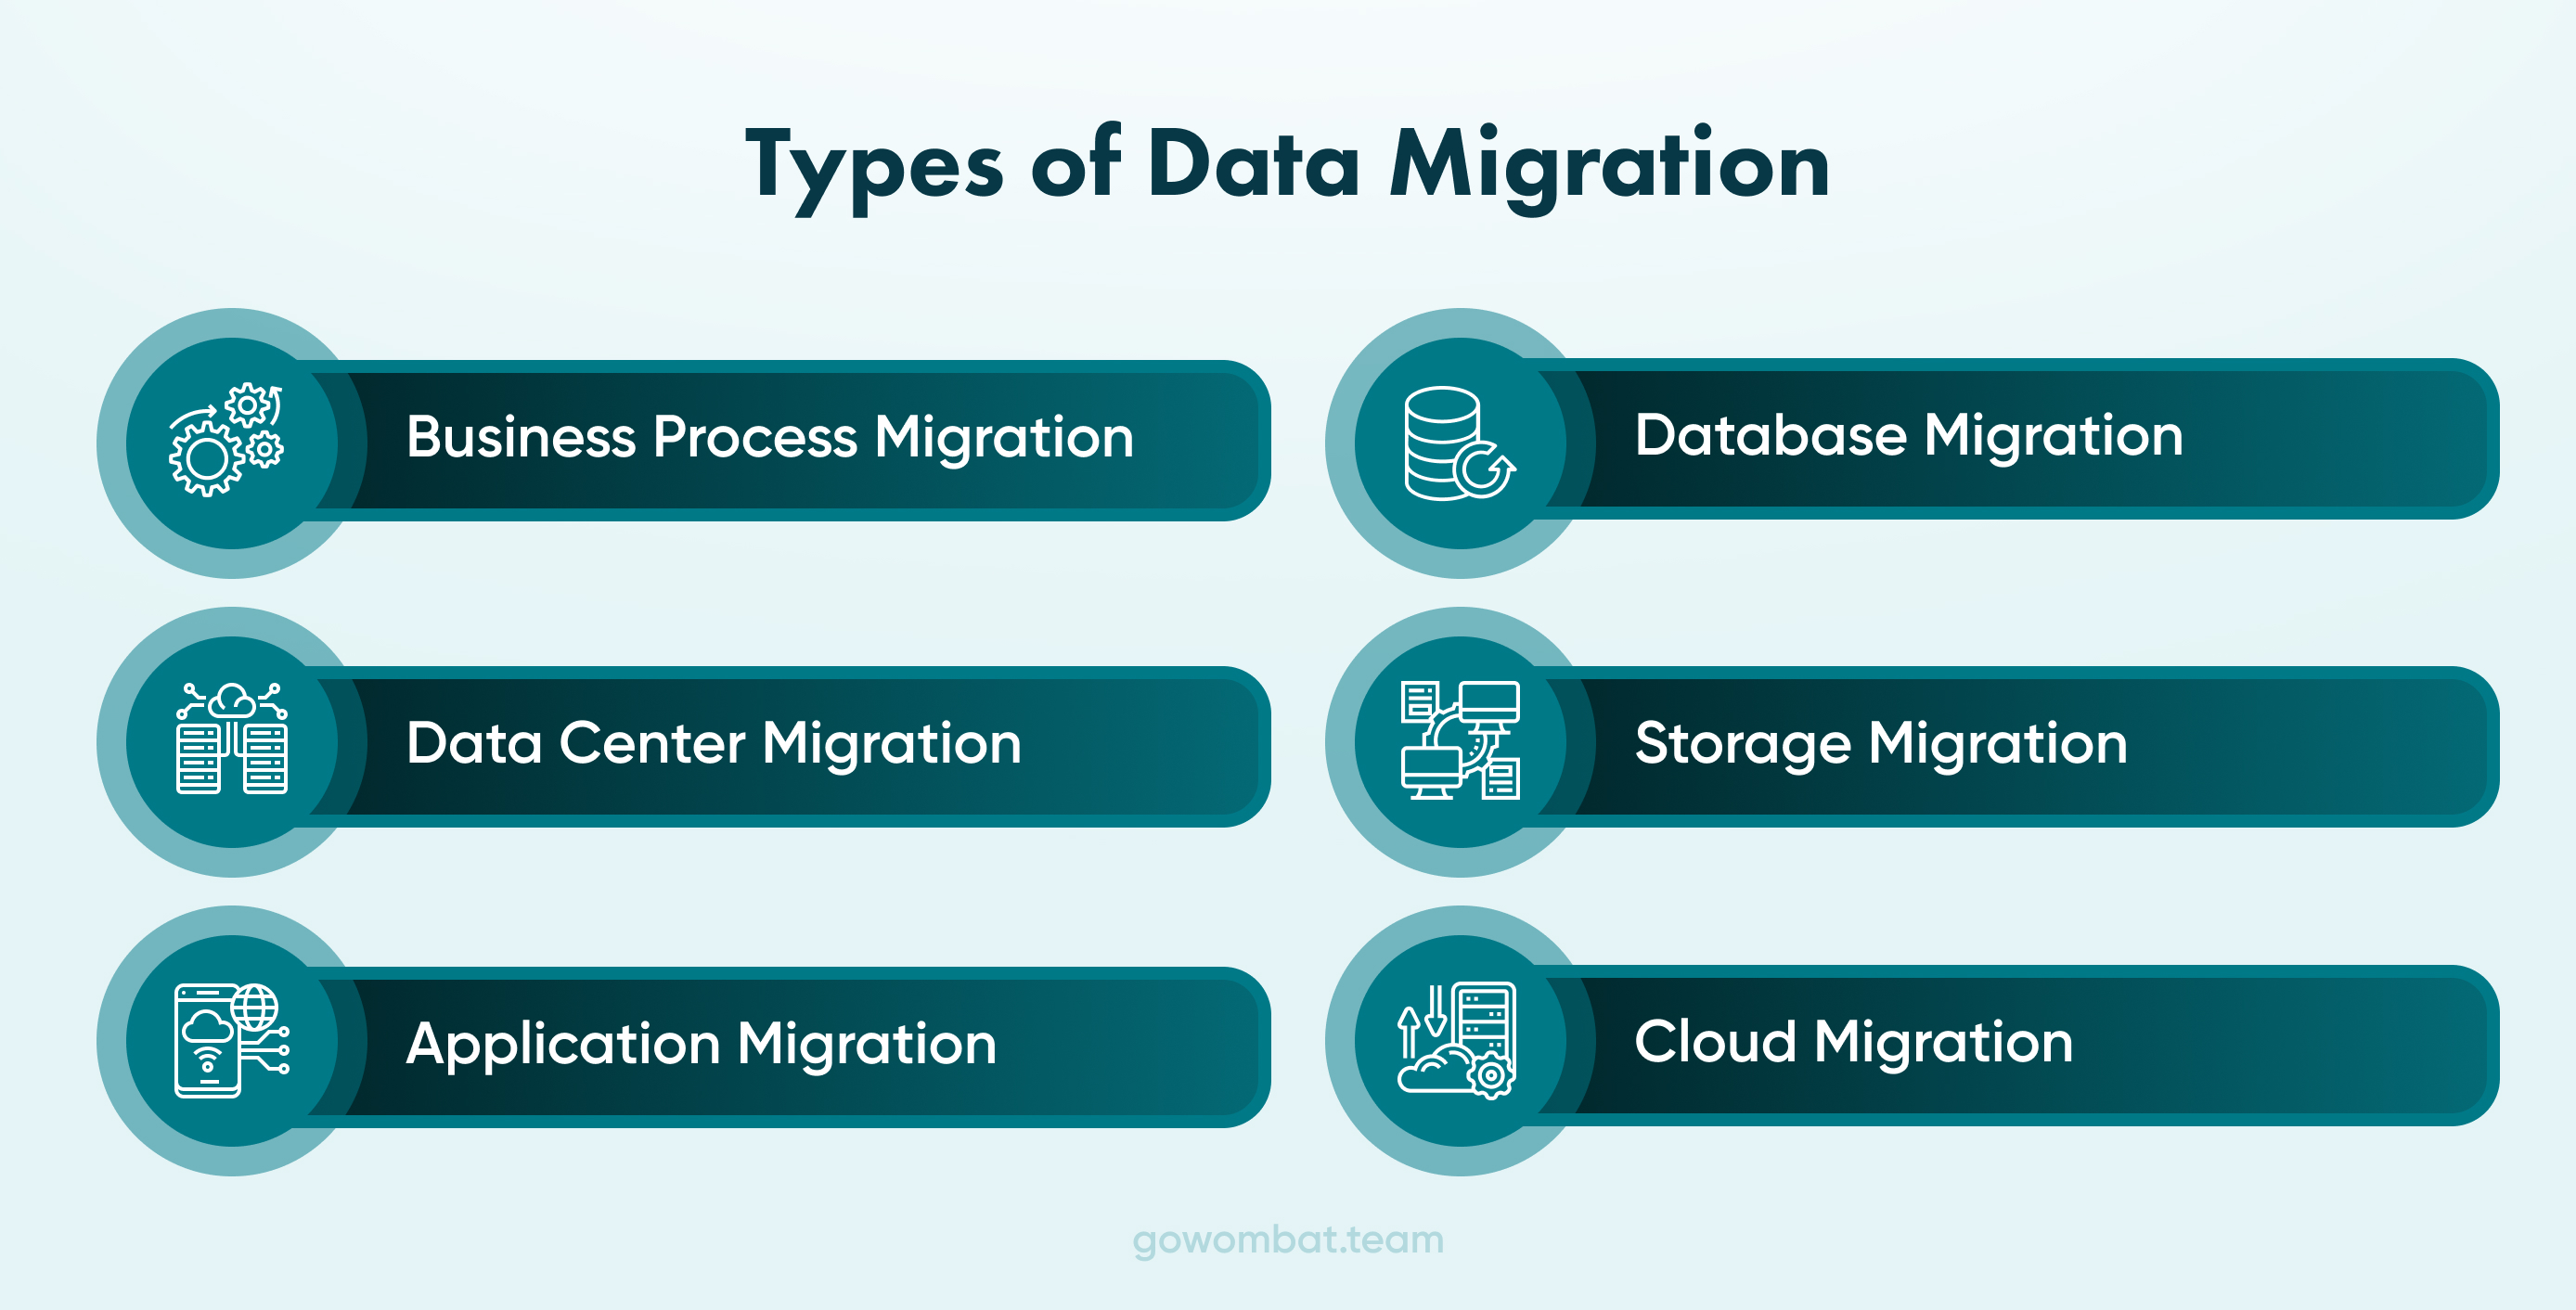 Data migration can include almost any forms of data in almost any format. Regardless of the types of data the porocess remains similar in all cases.